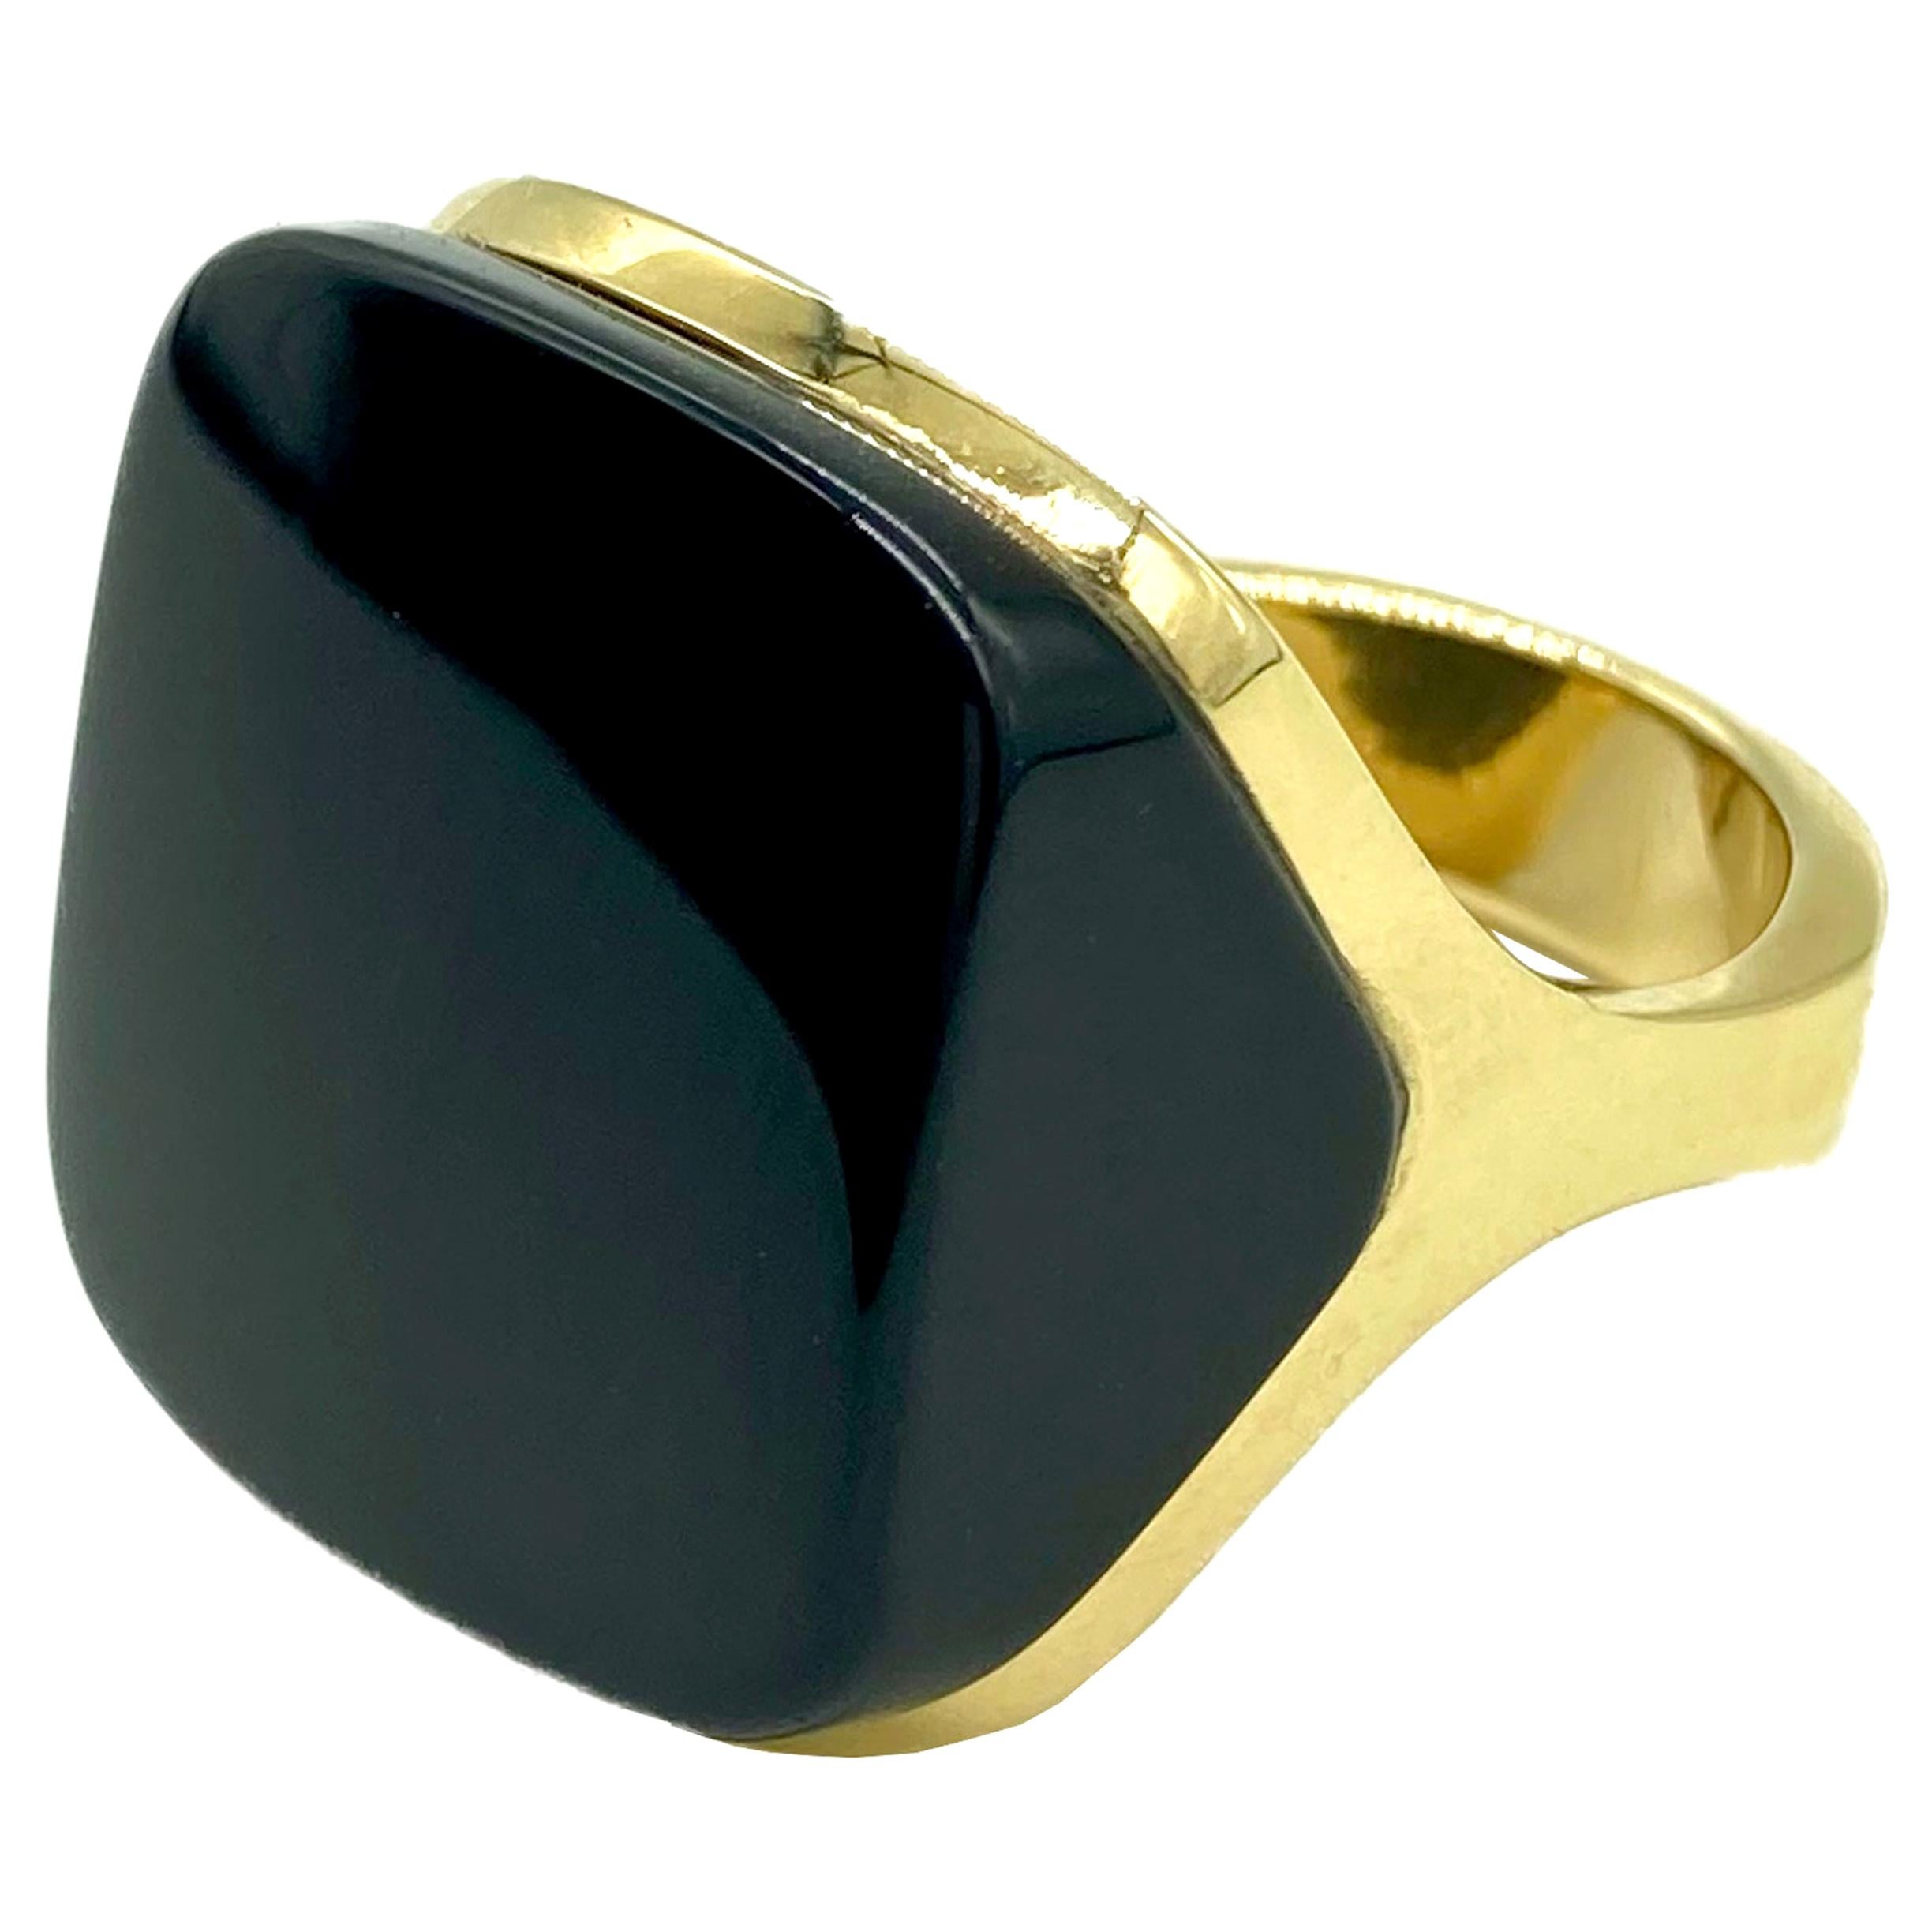 Black Onyx Square and Yellow Gold Ring